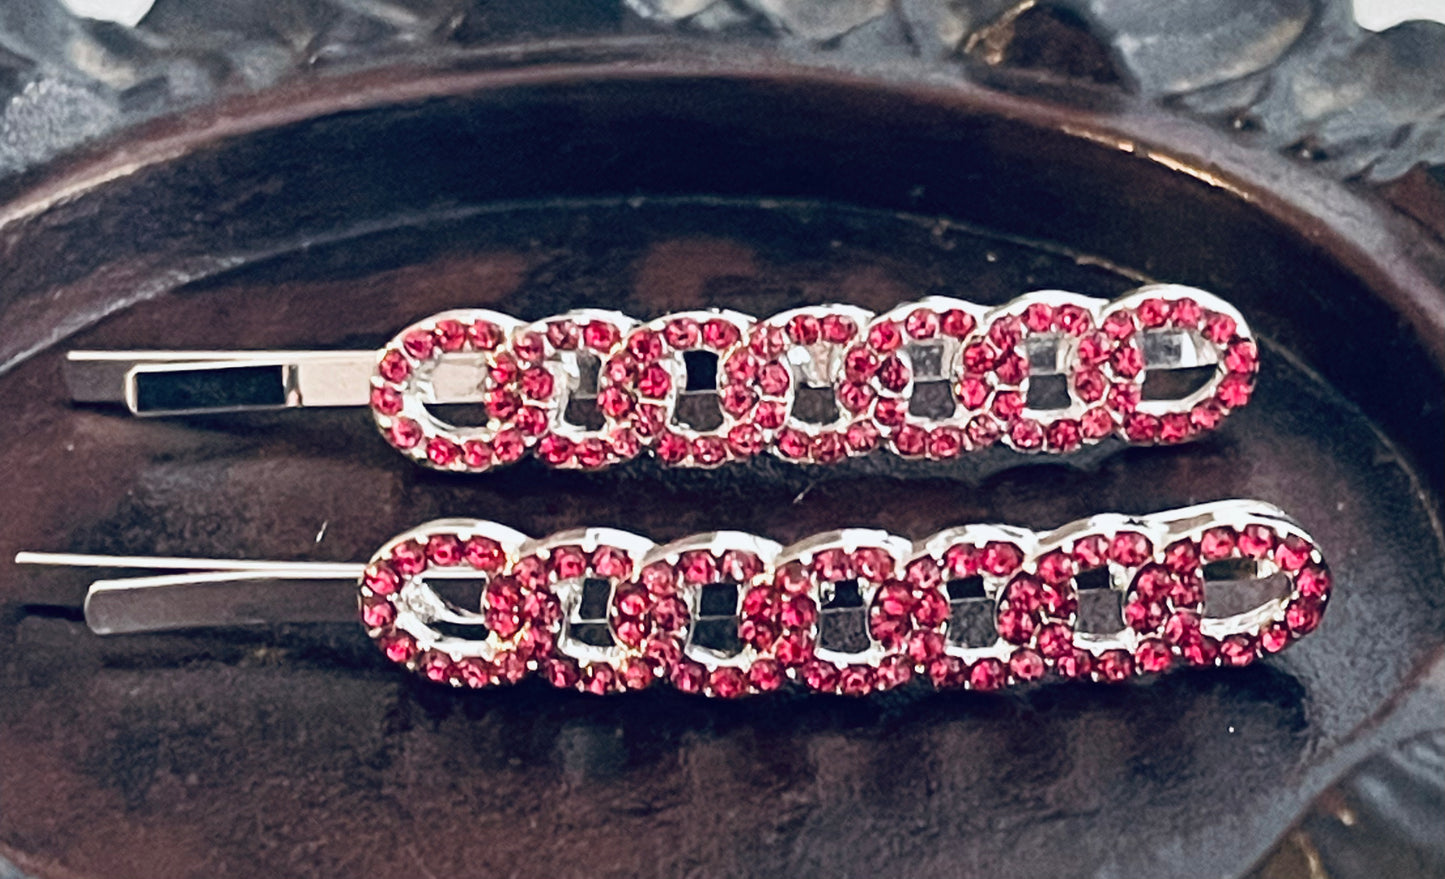 Pink Crystal rhinestone hairpins 2pc approximately 2.5”silver tone  formal hair accessories gift wedding bridesmaid princess accessory